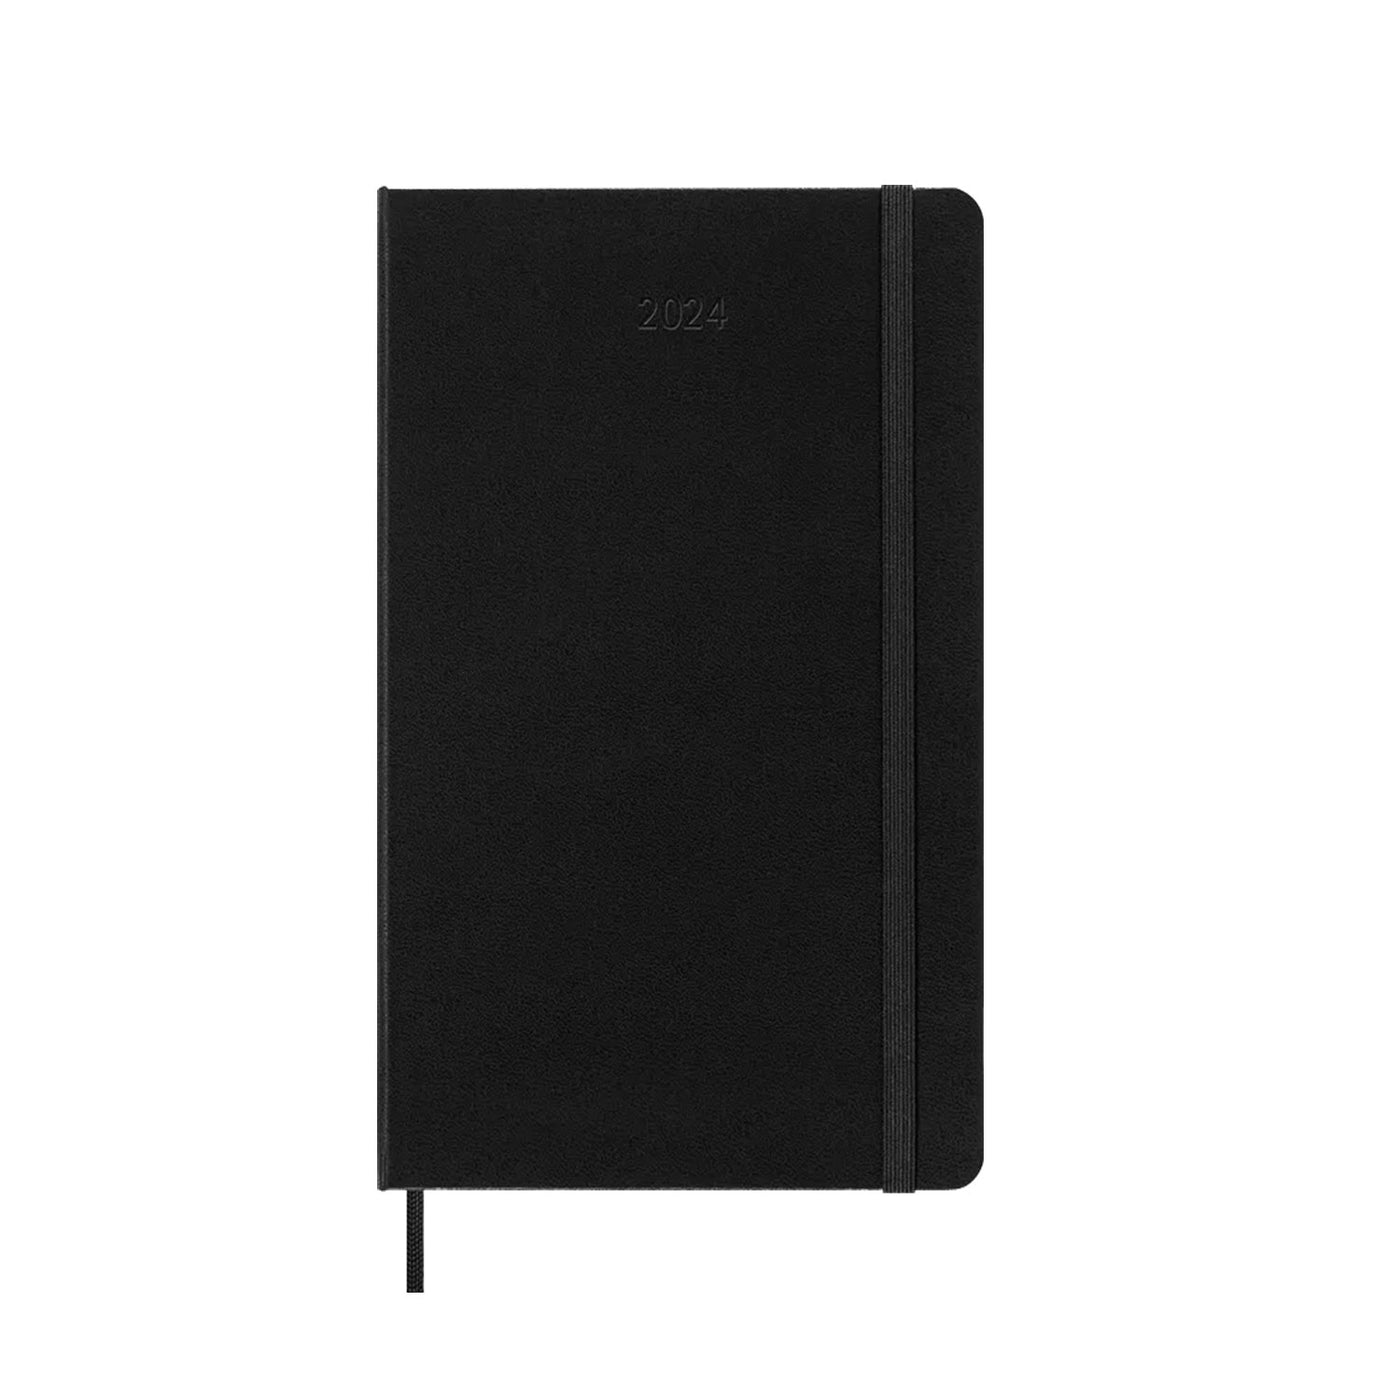 Moleskine 2024 Classic Large Hard Cover Daily Planner - Black 2